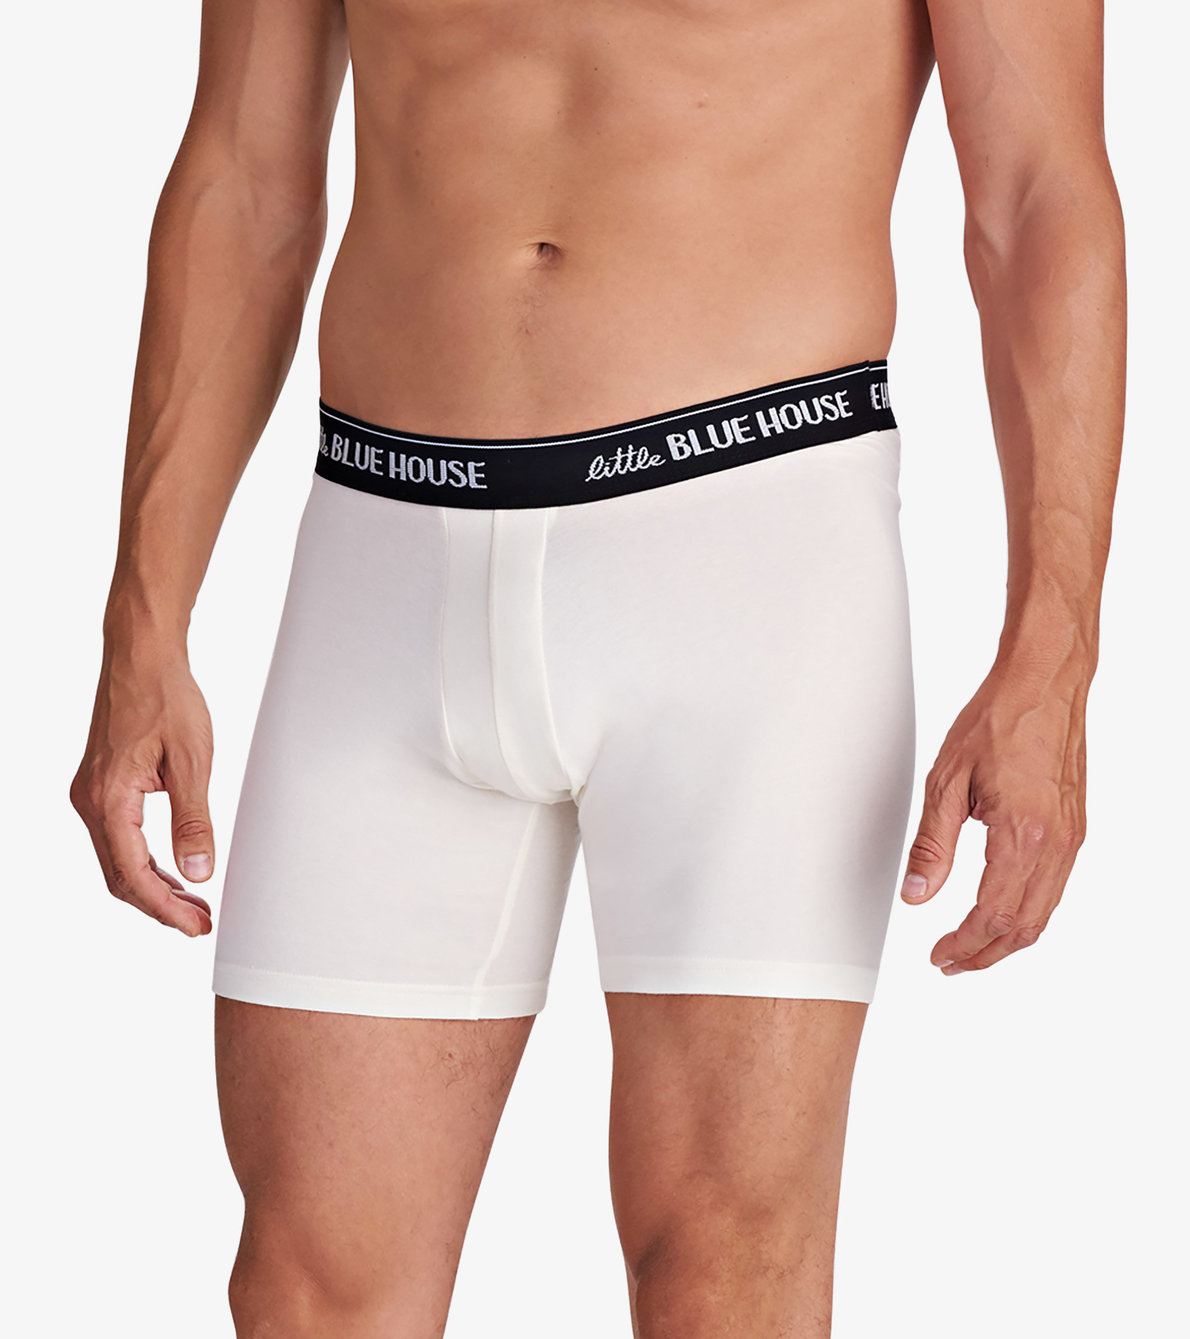 View larger image of Nice Bass Men's Boxer Briefs